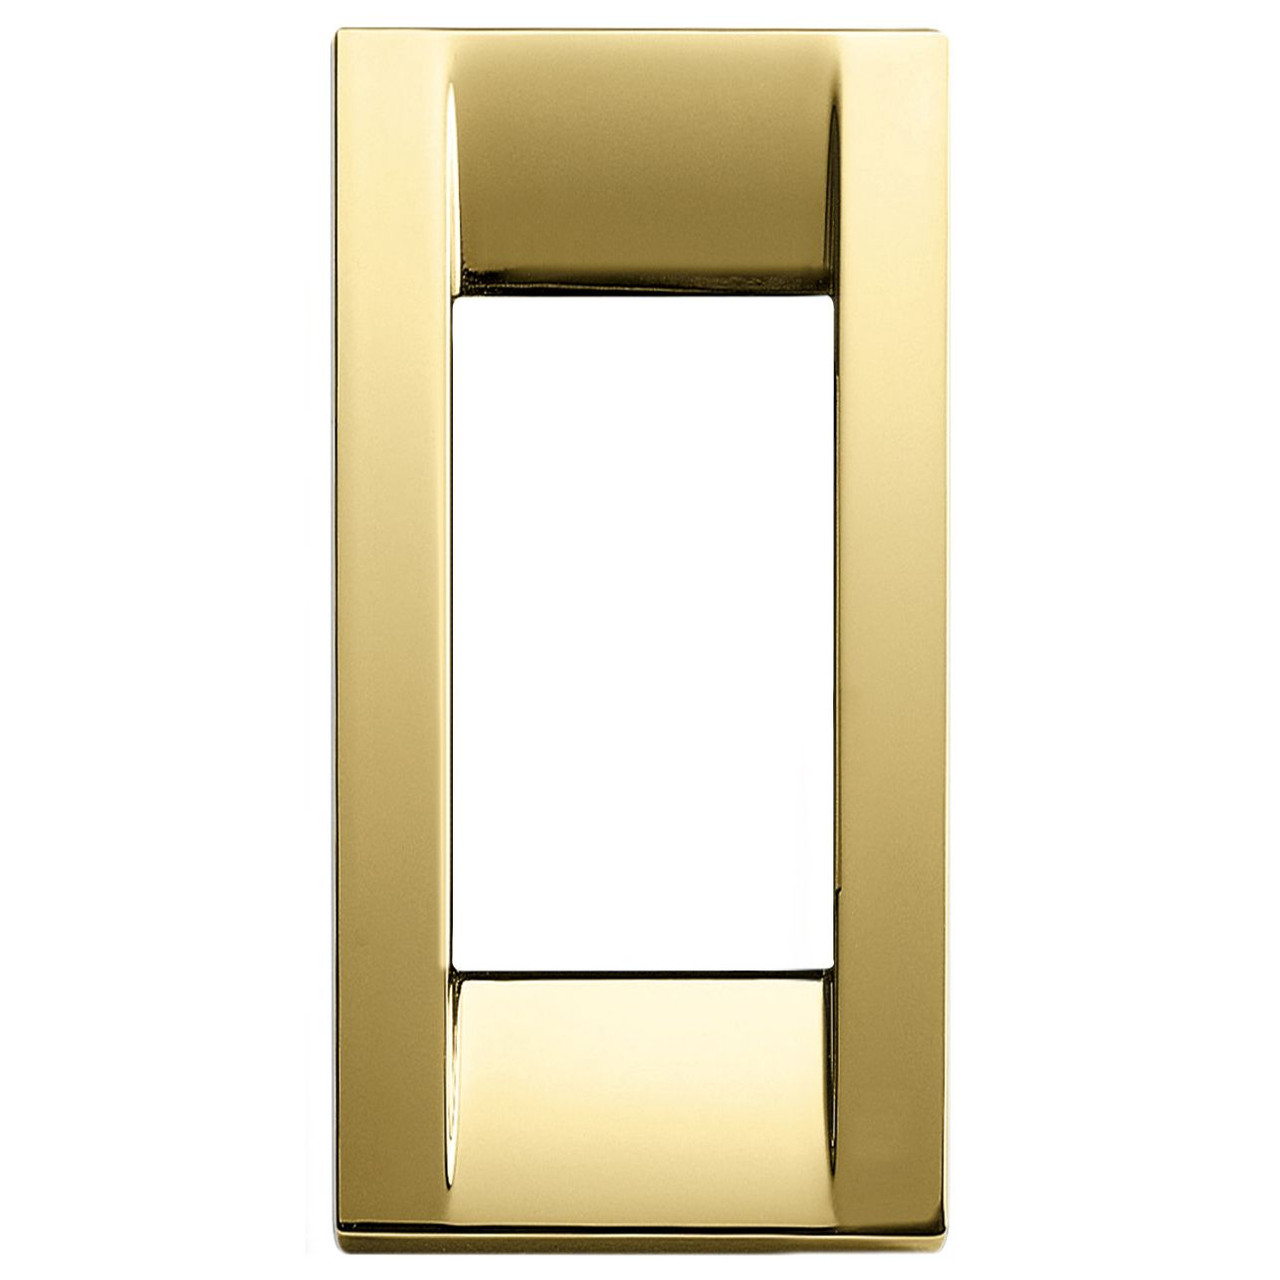 Vimar - Idea Placca 16734 Classica Cover Plate - Die-cast Metal, Polished Gold - Apollo Lighting